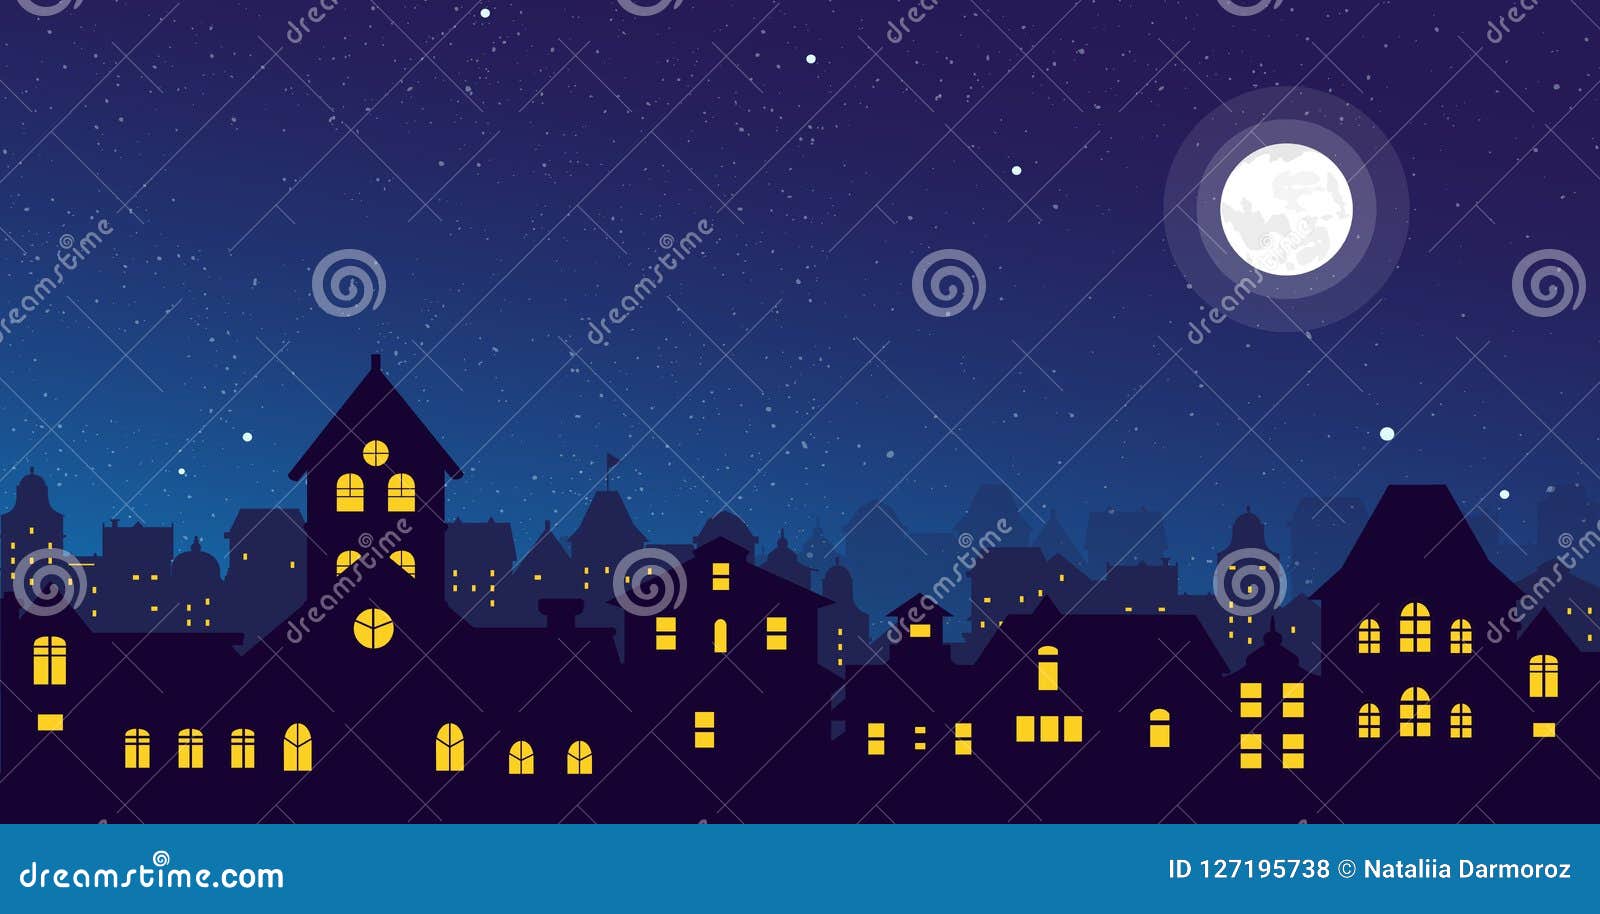   of the night town skyline with a full moon over urban houses rooftops in flat style.